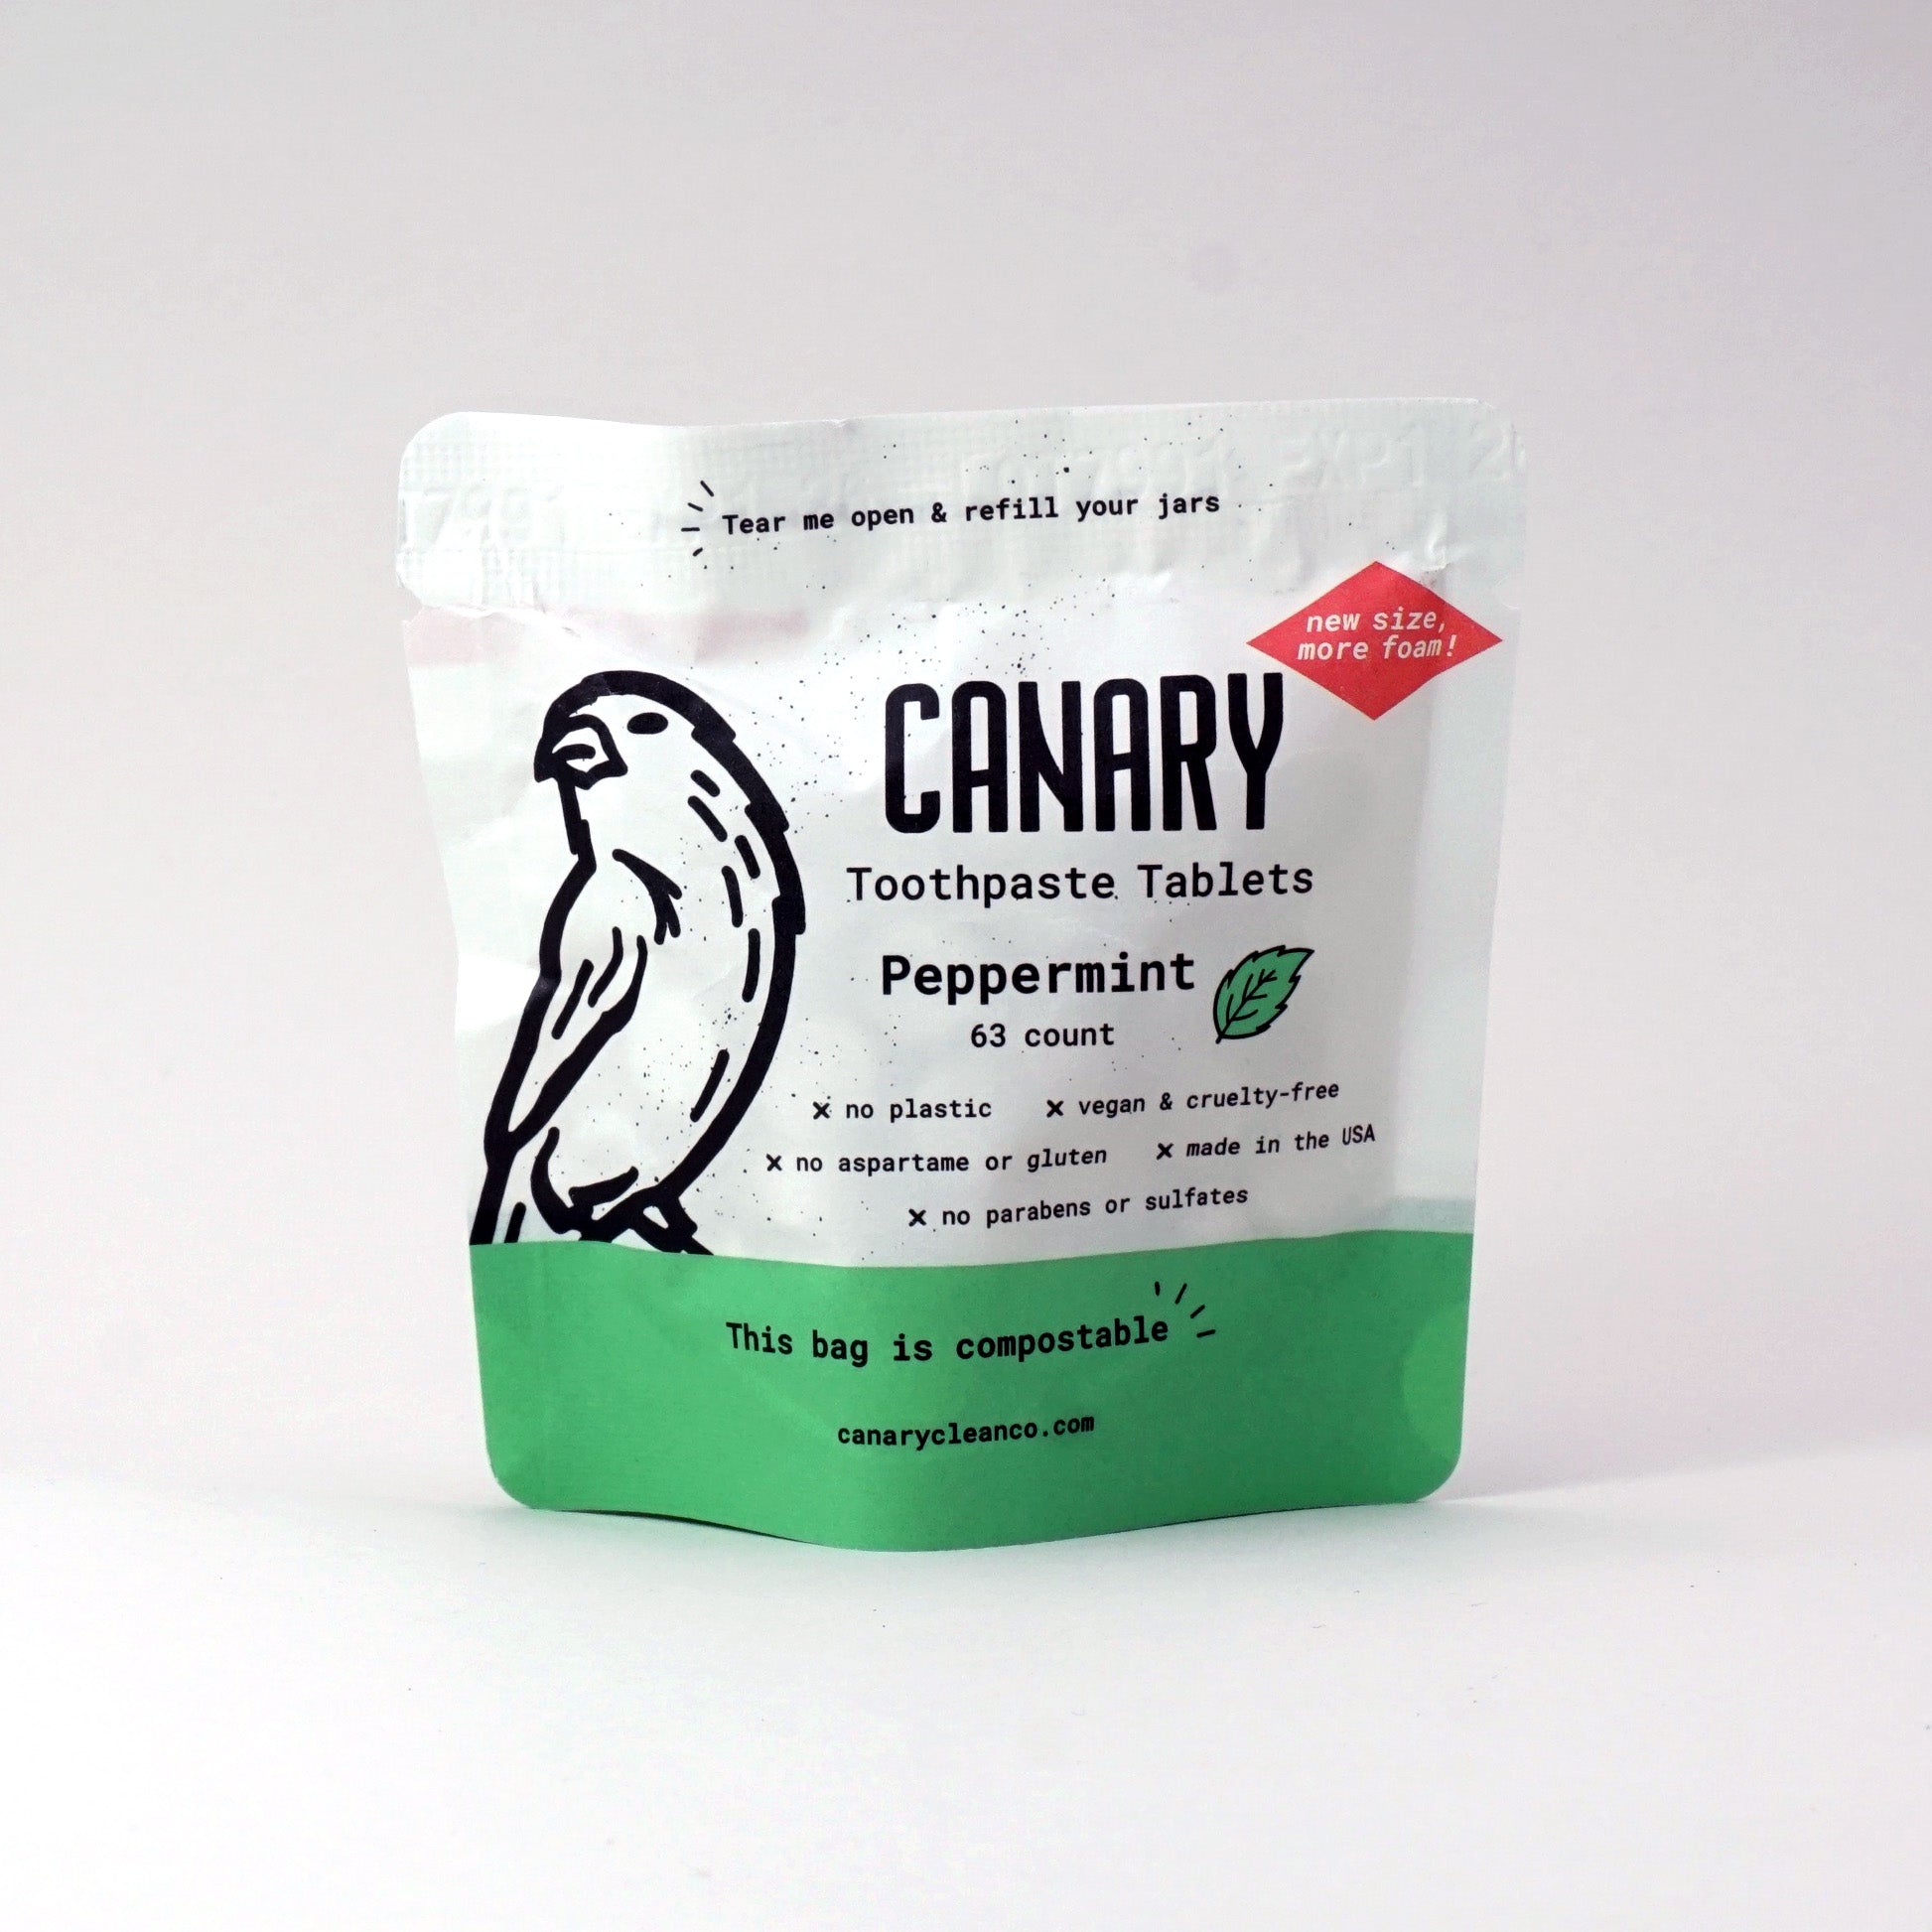 New and improved Canary Peppermint Toothpaste Tablets, front view of new 63ct compostable pouch